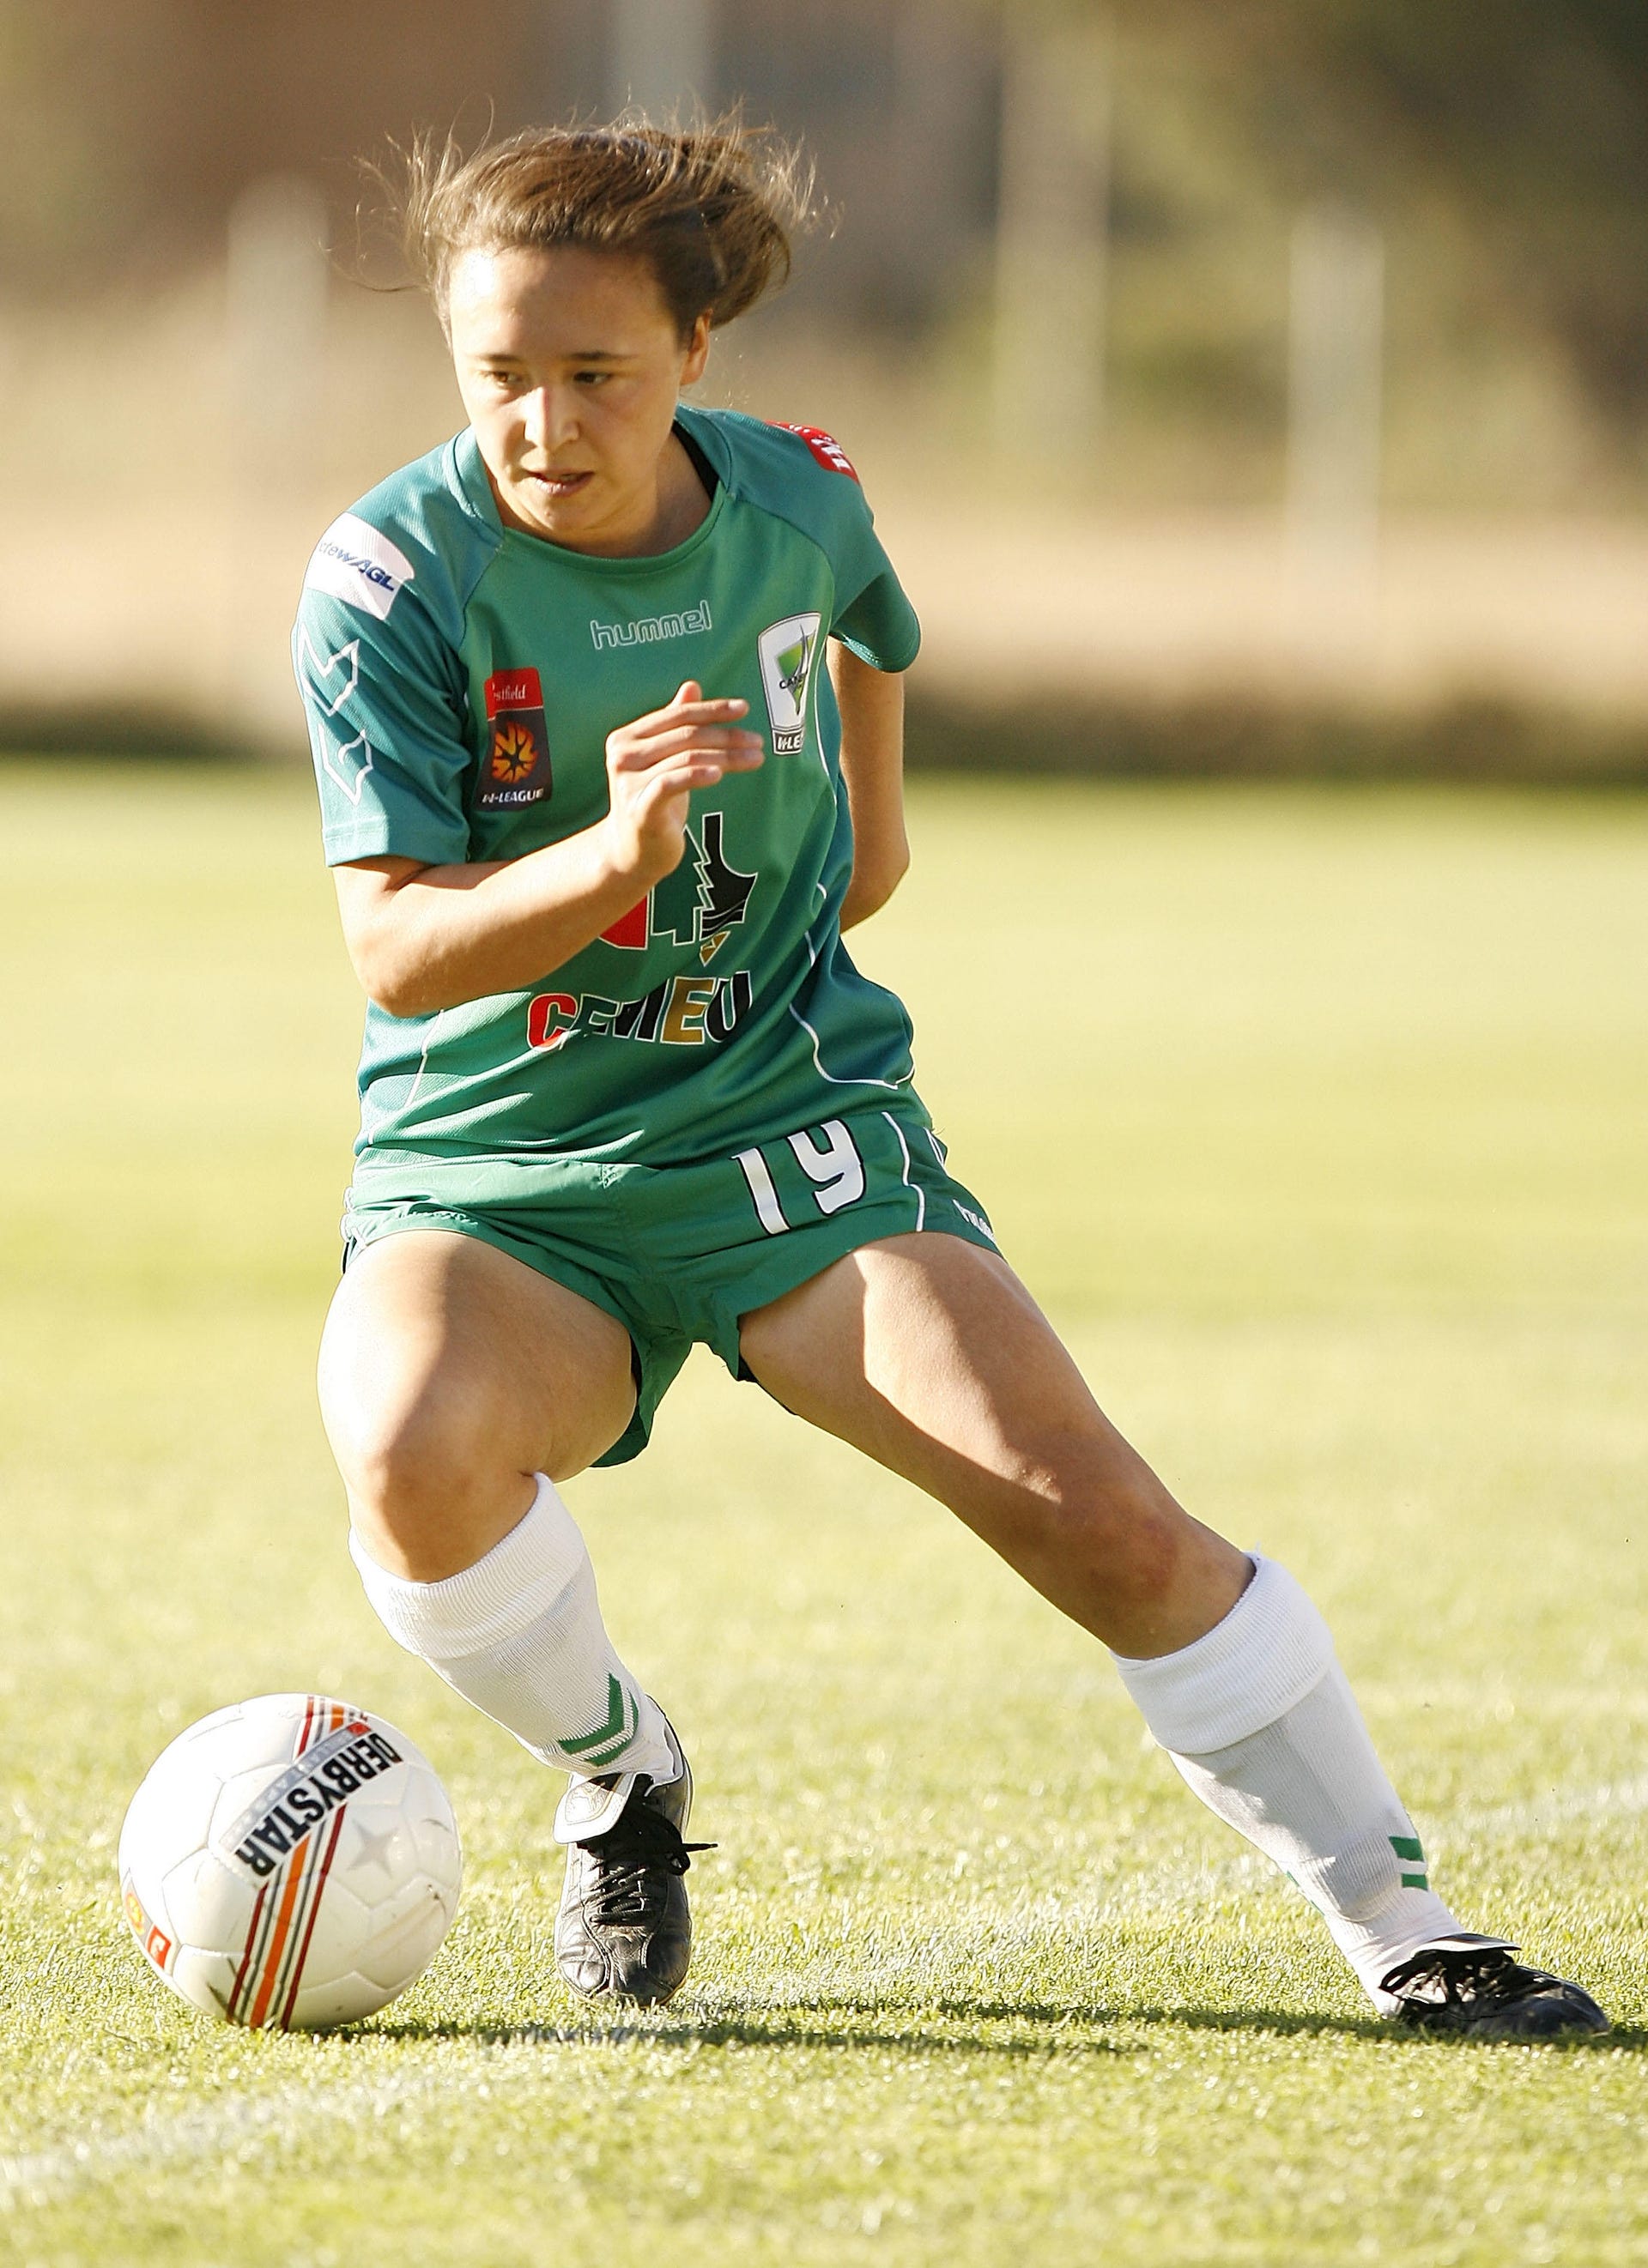 W-League Rd 10 - Canberra v Adelaide